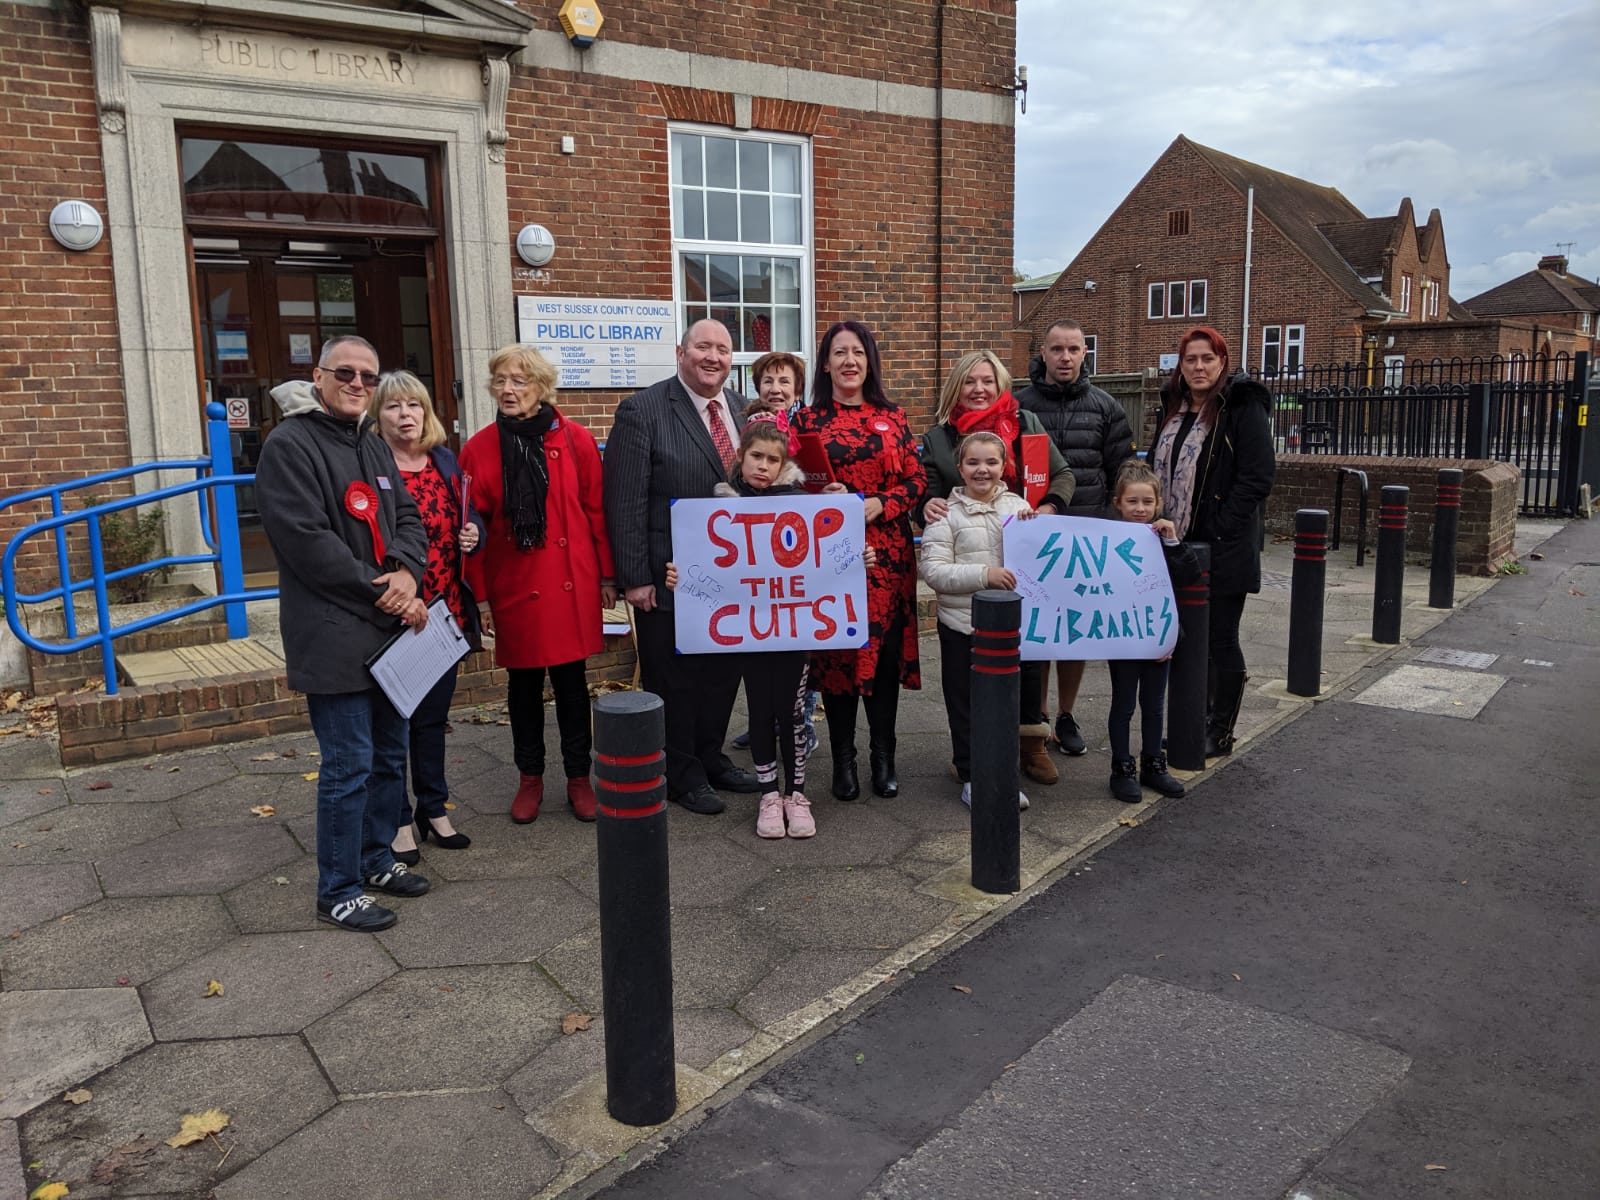 Labour campaigners oppose Library cuts